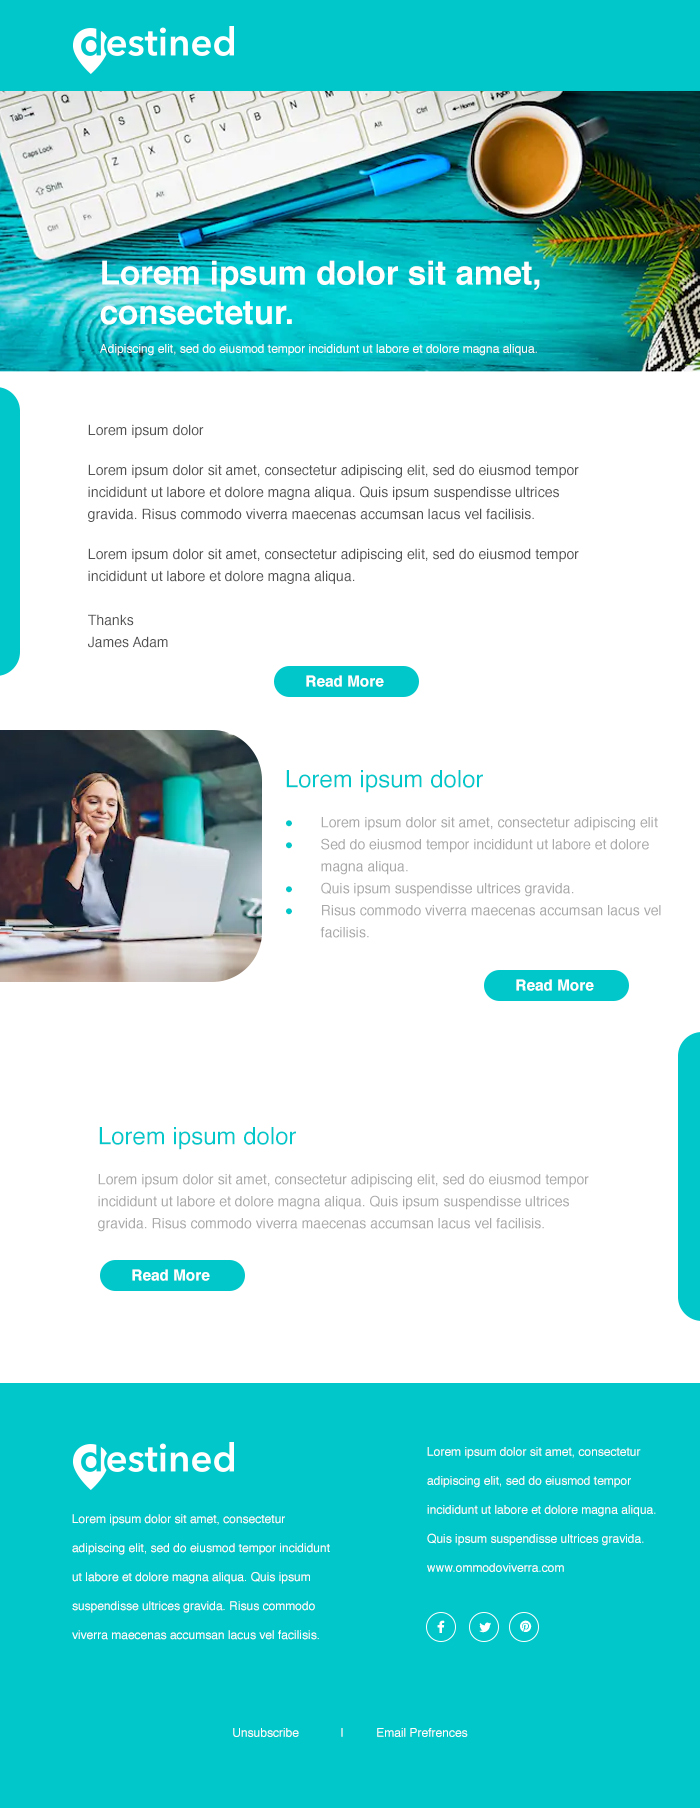 Pardot Email Template